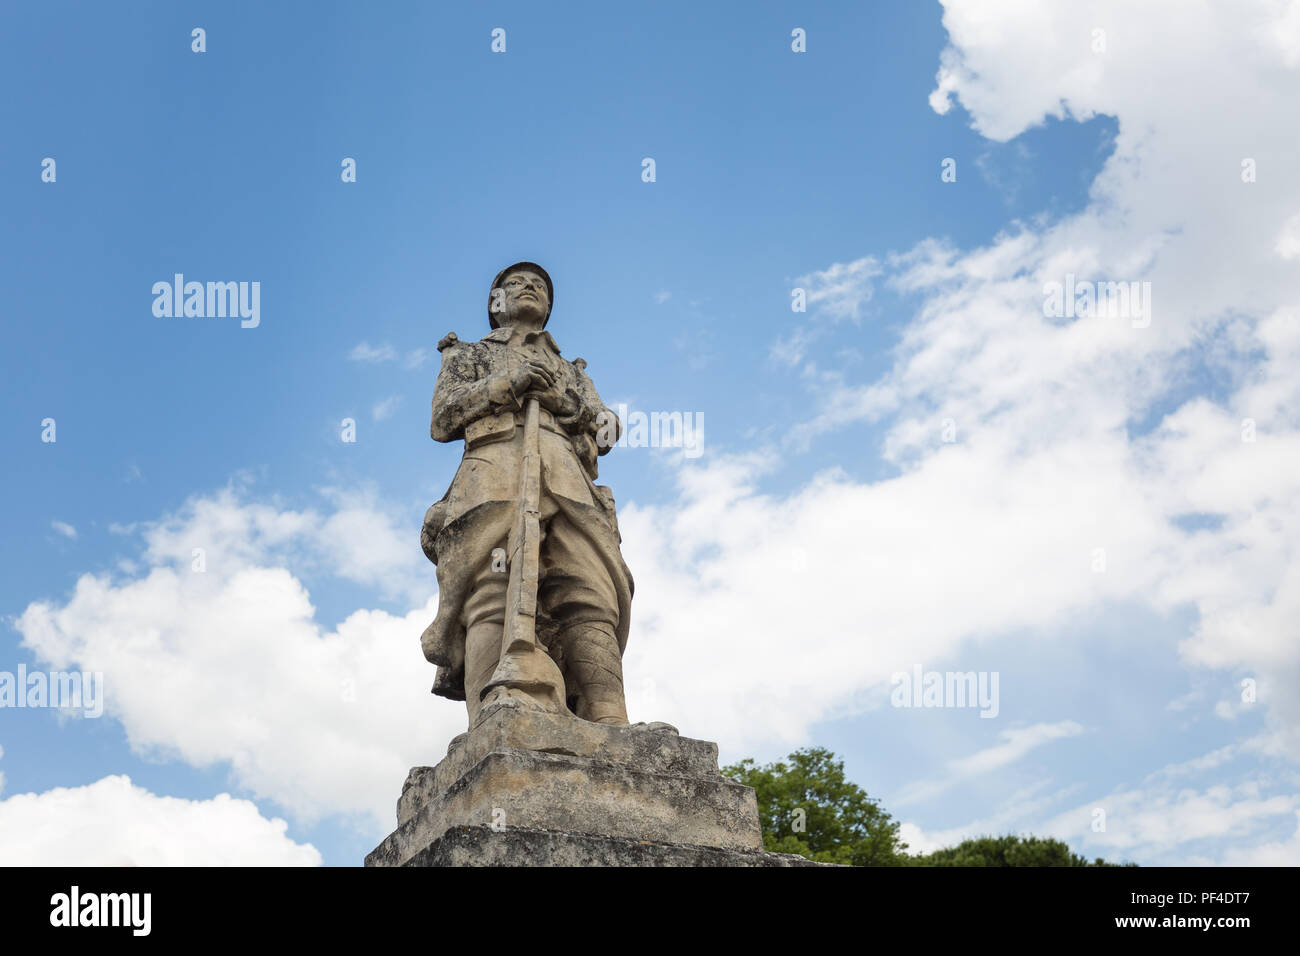 A memorial statue for WWI in Gordes, Provence, France Stock Photo